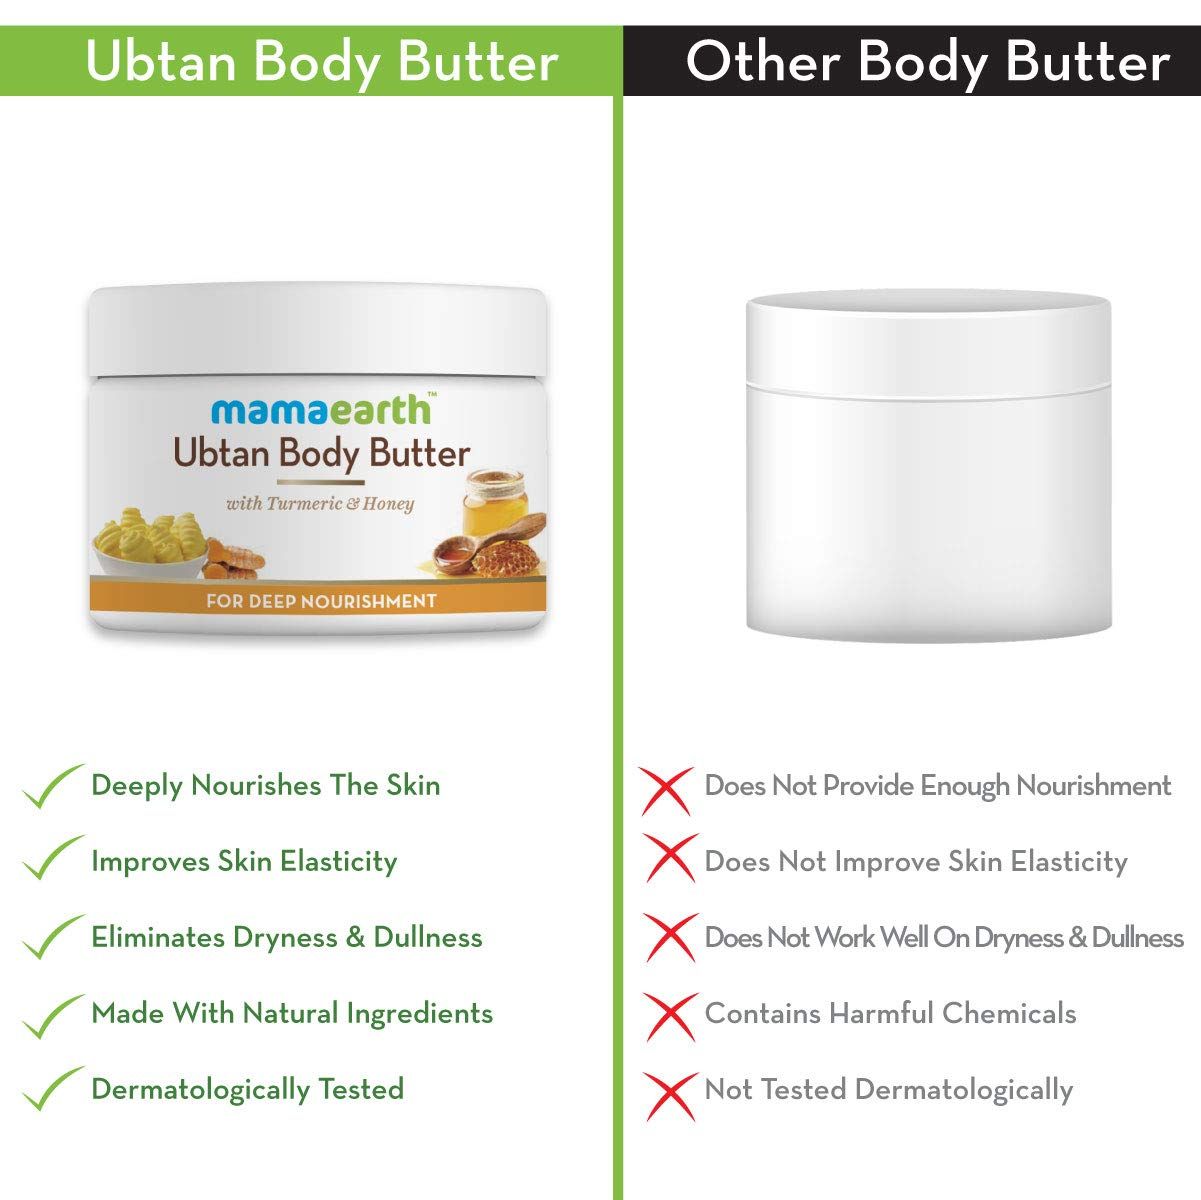 Ubtan Body Butter, For Dry Skin, With Turmeric and Honey, For Deep Nourishment - 200g